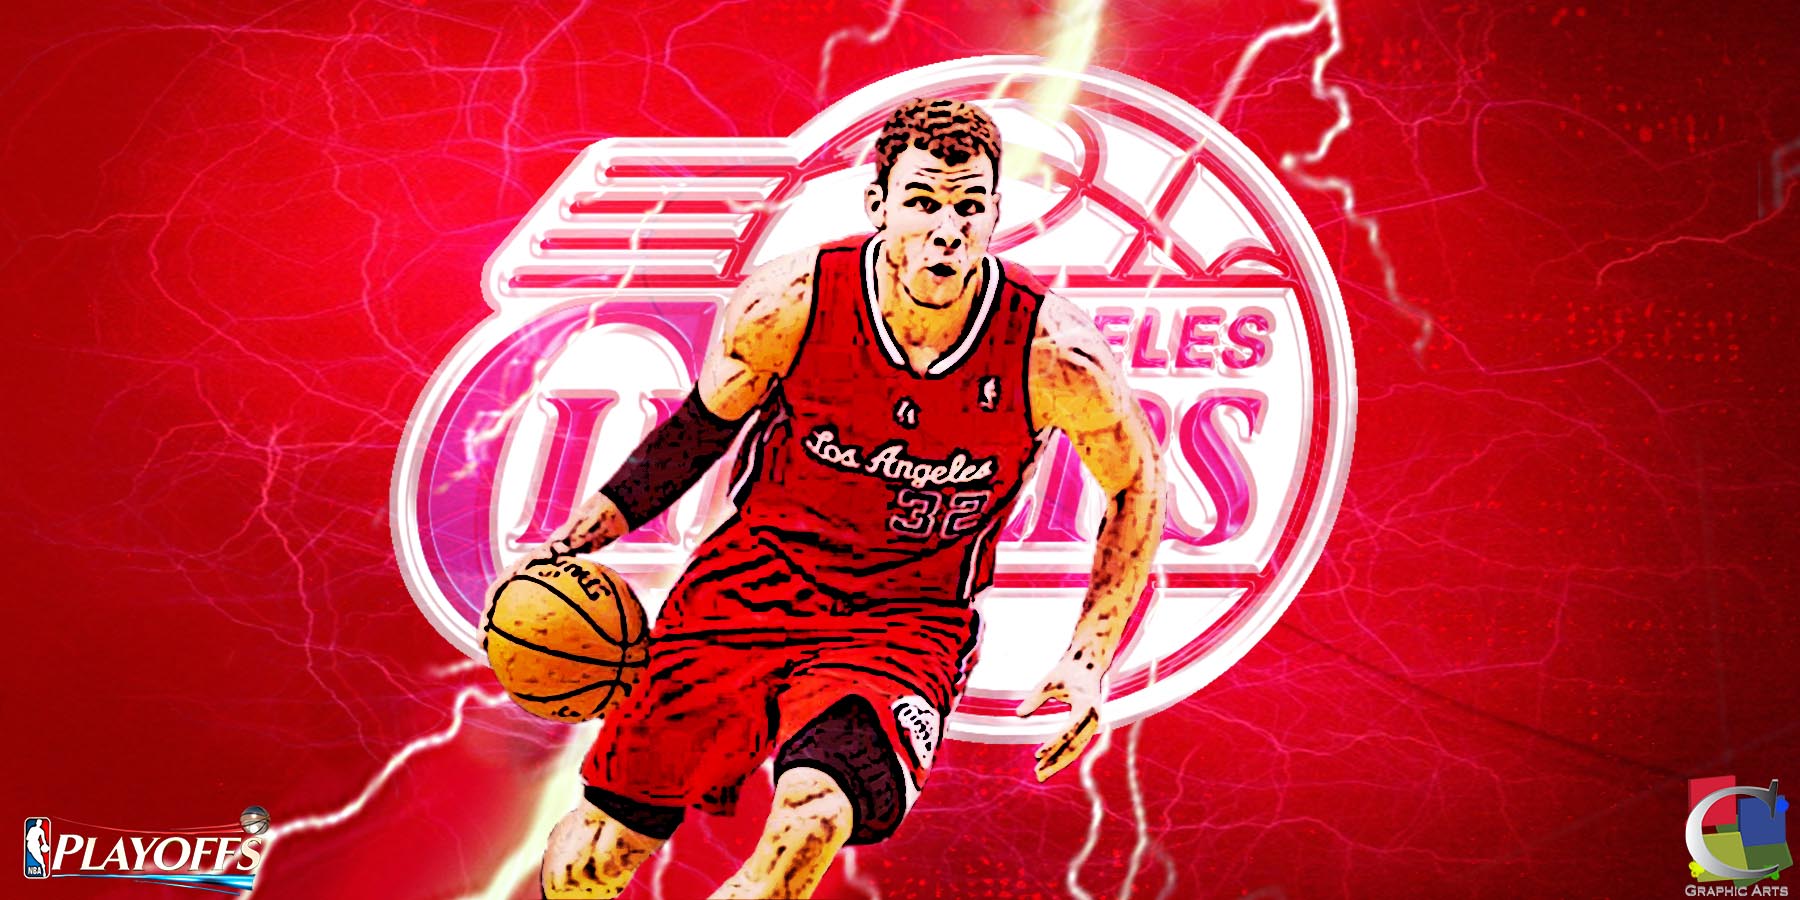 Blake Griffin Wallpaper By Cgraphicarts